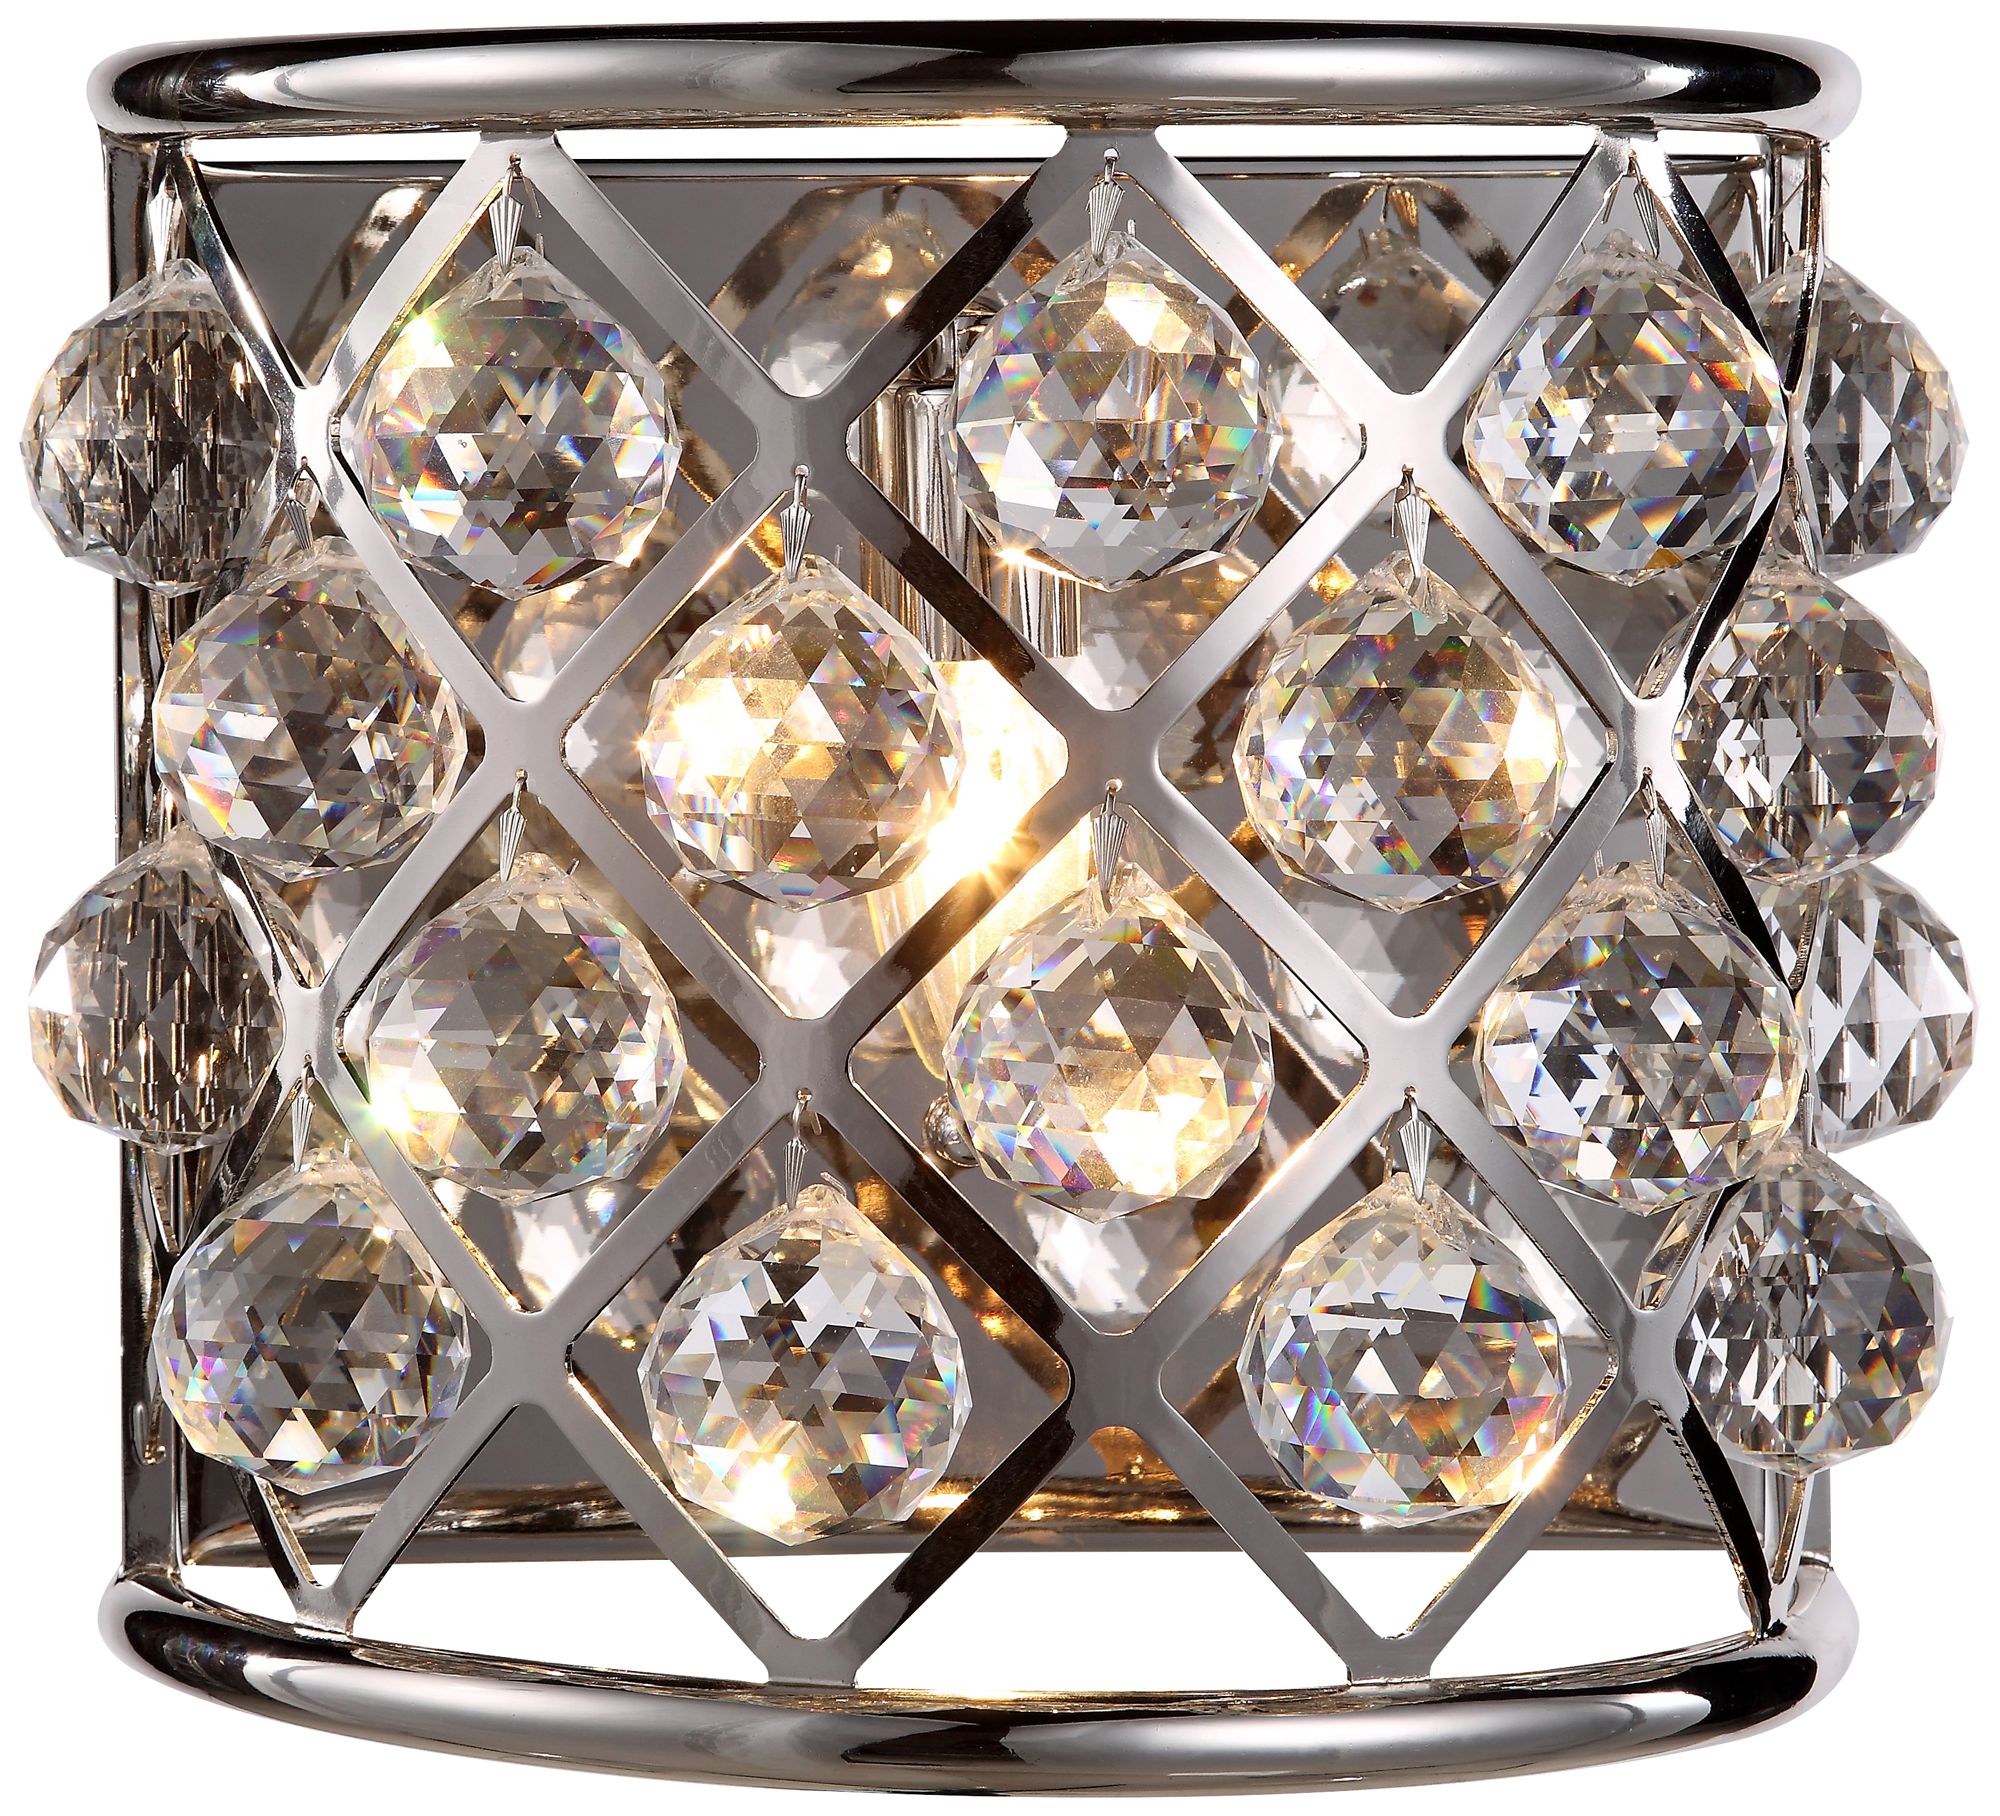 Madison 10 1/2" High Nickel Wall Sconce w/ Faceted Crystals